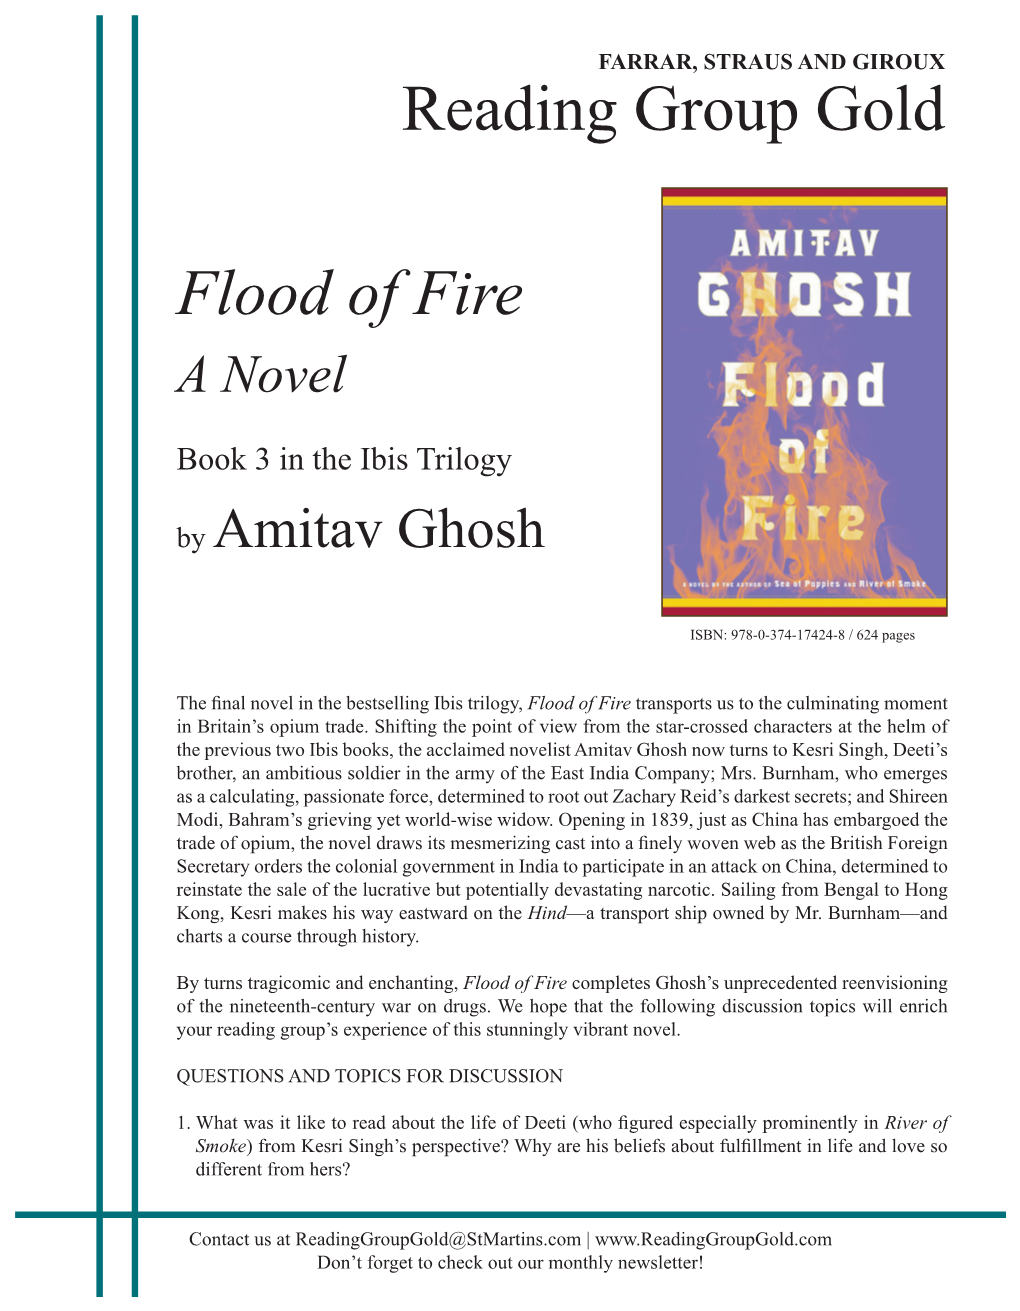 Flood of Fire Reading Group Gold